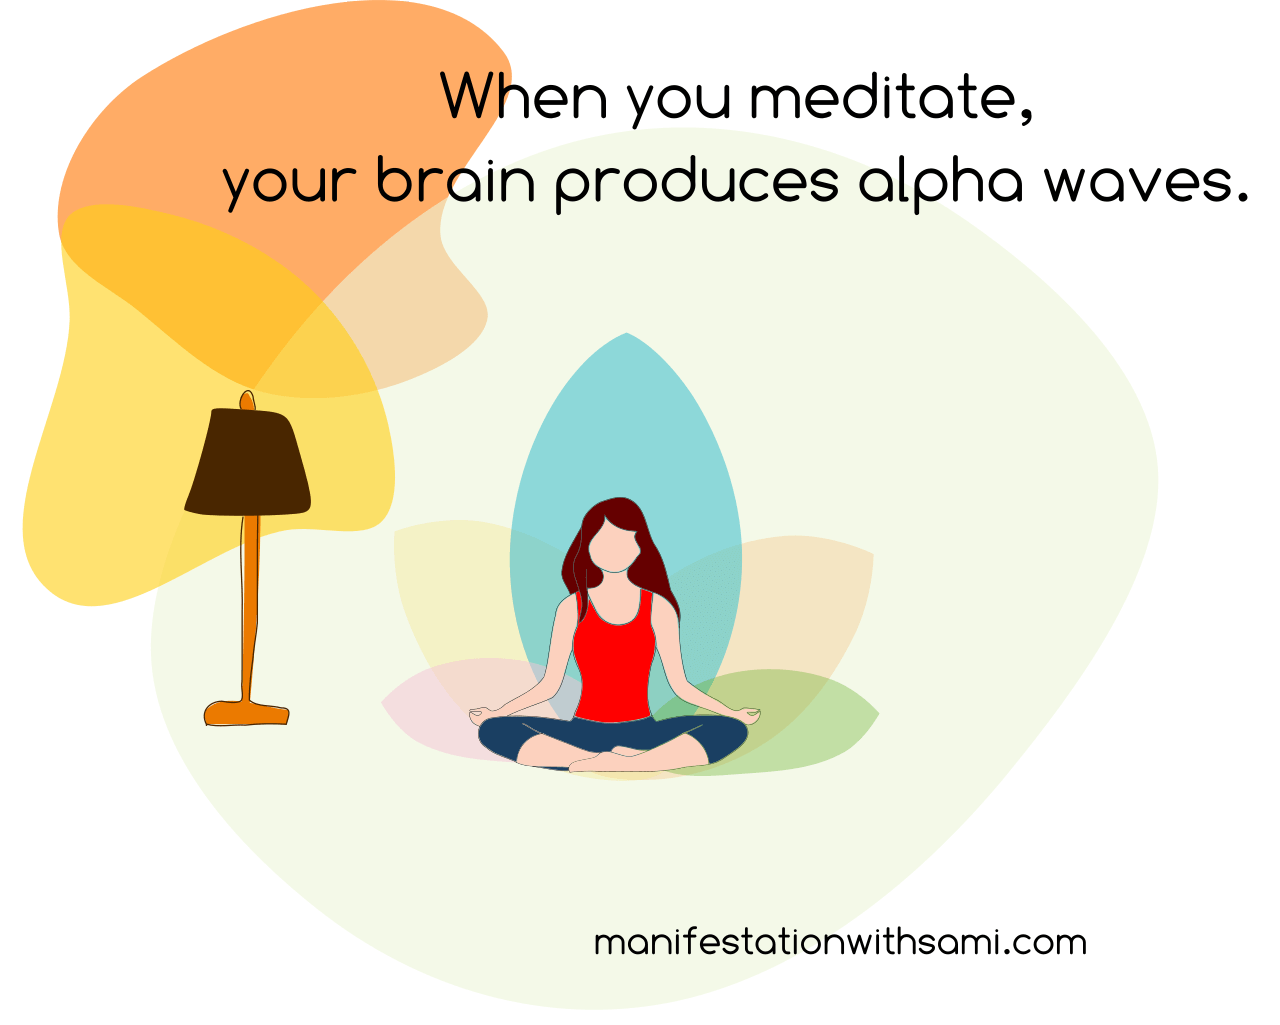 When you meditate, your brain produces alpha waves.